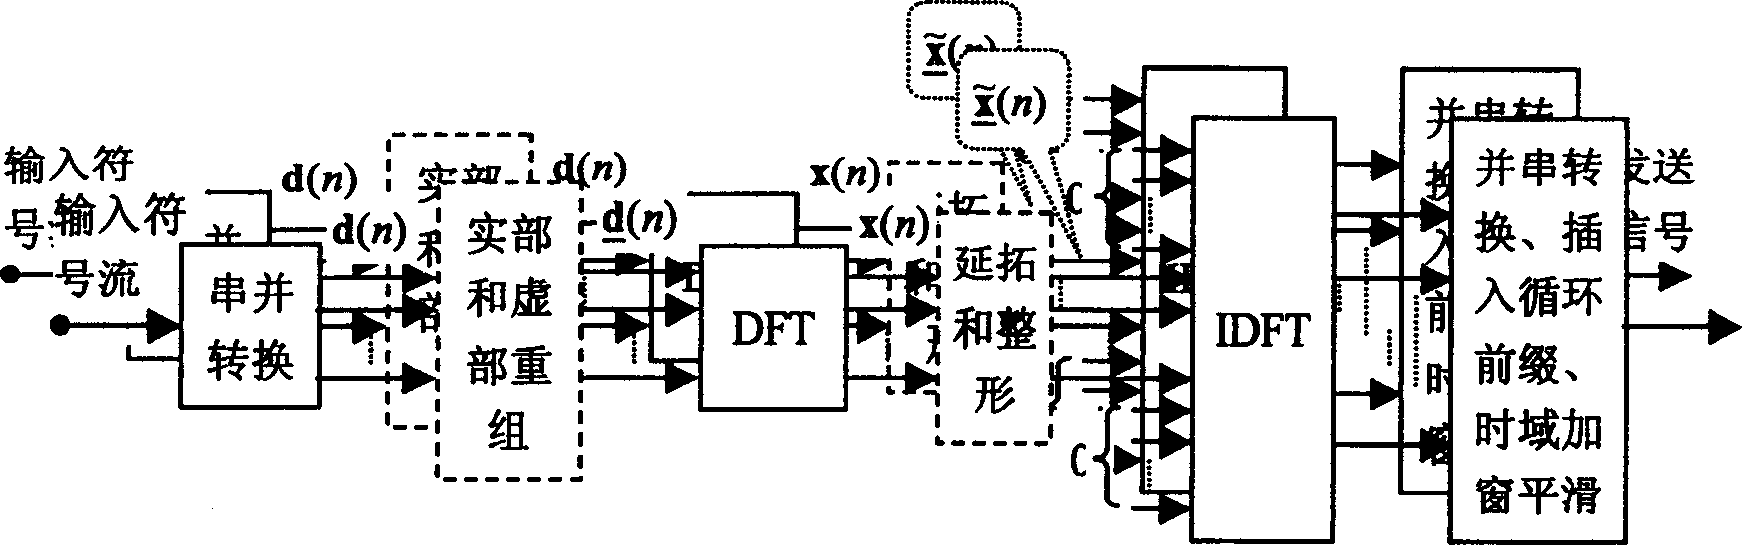 Transmission tech. scheme for low peak equal ratio orthogonal frequency division multiplex